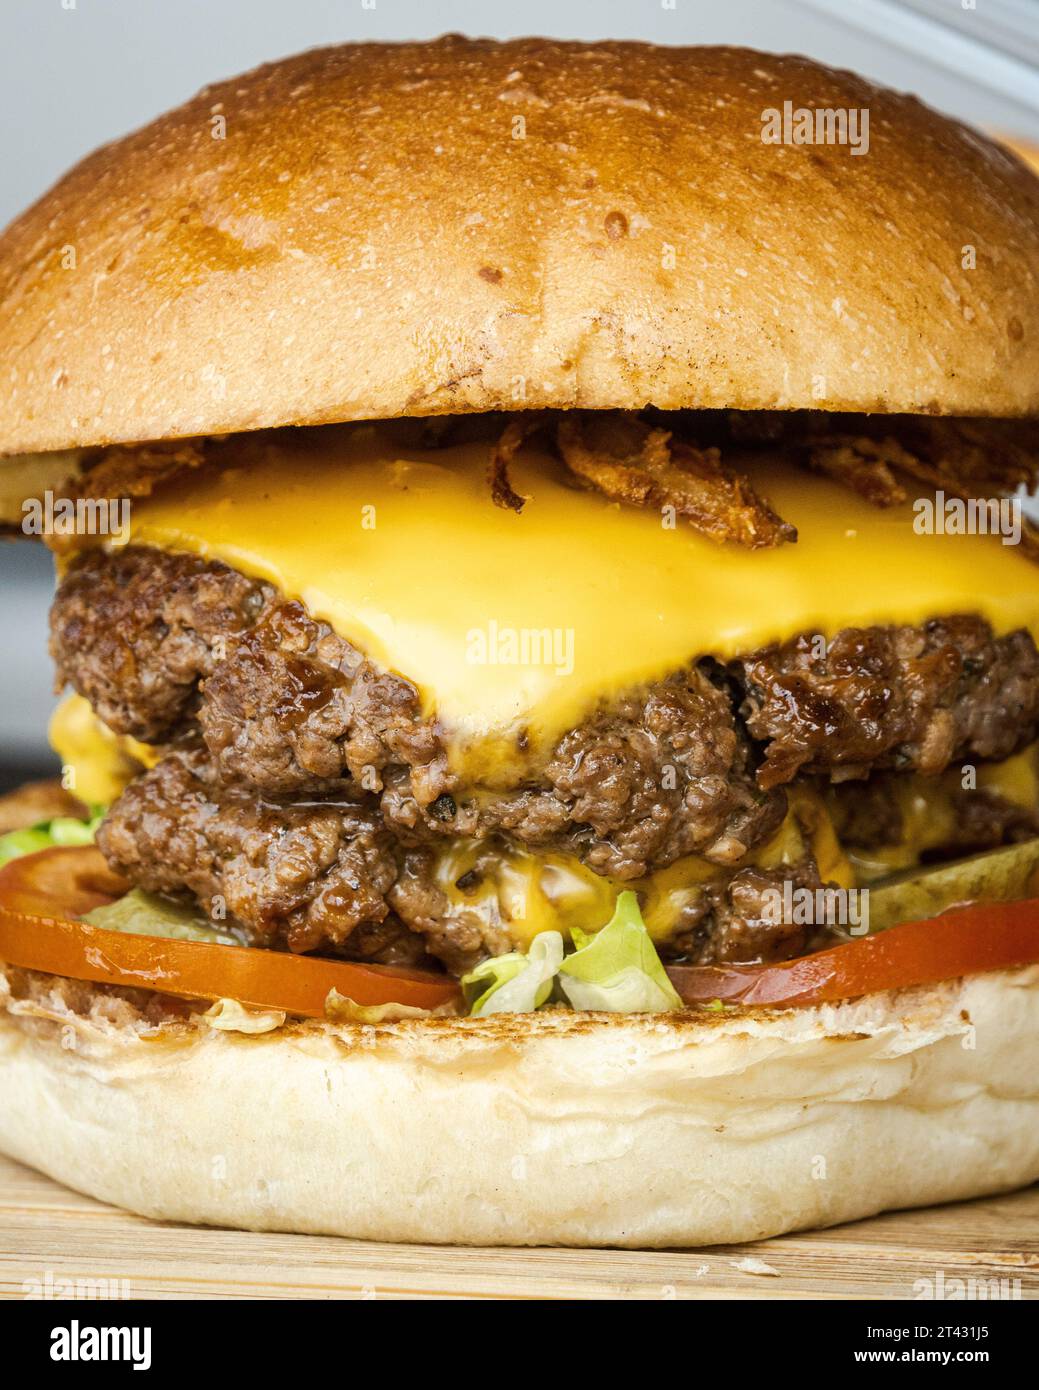 Full frame Close-up of a double cheeseburger Stock Photo